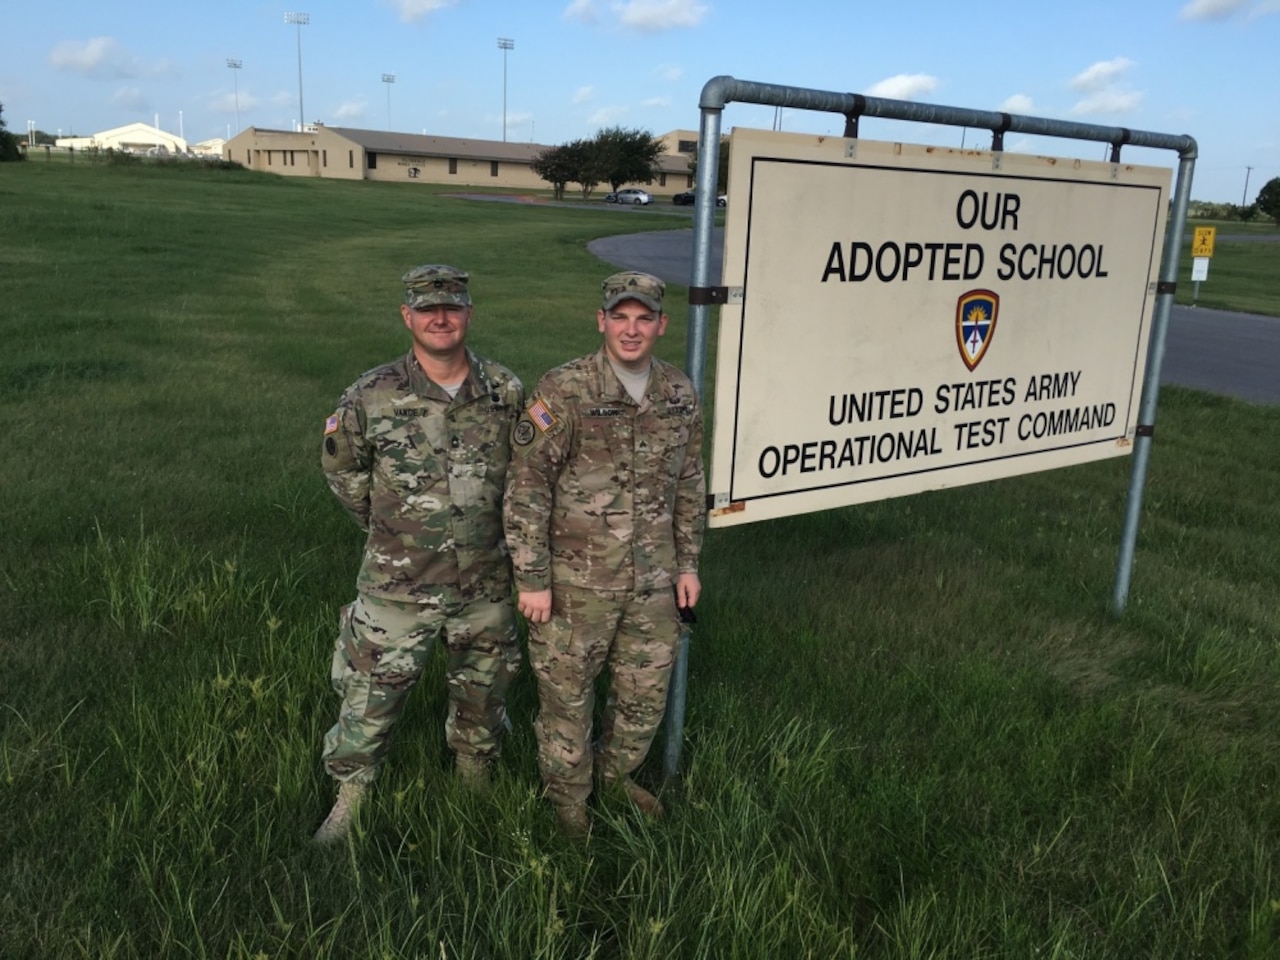 Army Master Sgt. Earnest L. Vance, U.S. Army Operational Test Command's Test Technology Directorate noncommissioned officer in charge, left, and Army Sgt. Jacob D. Wilson, command group NCOIC, stand before OTC's Adopt-A-School sign at Florence Middle School, Florence, Texas, Sept. 9, 2016. Army photo by Michael Novogradac